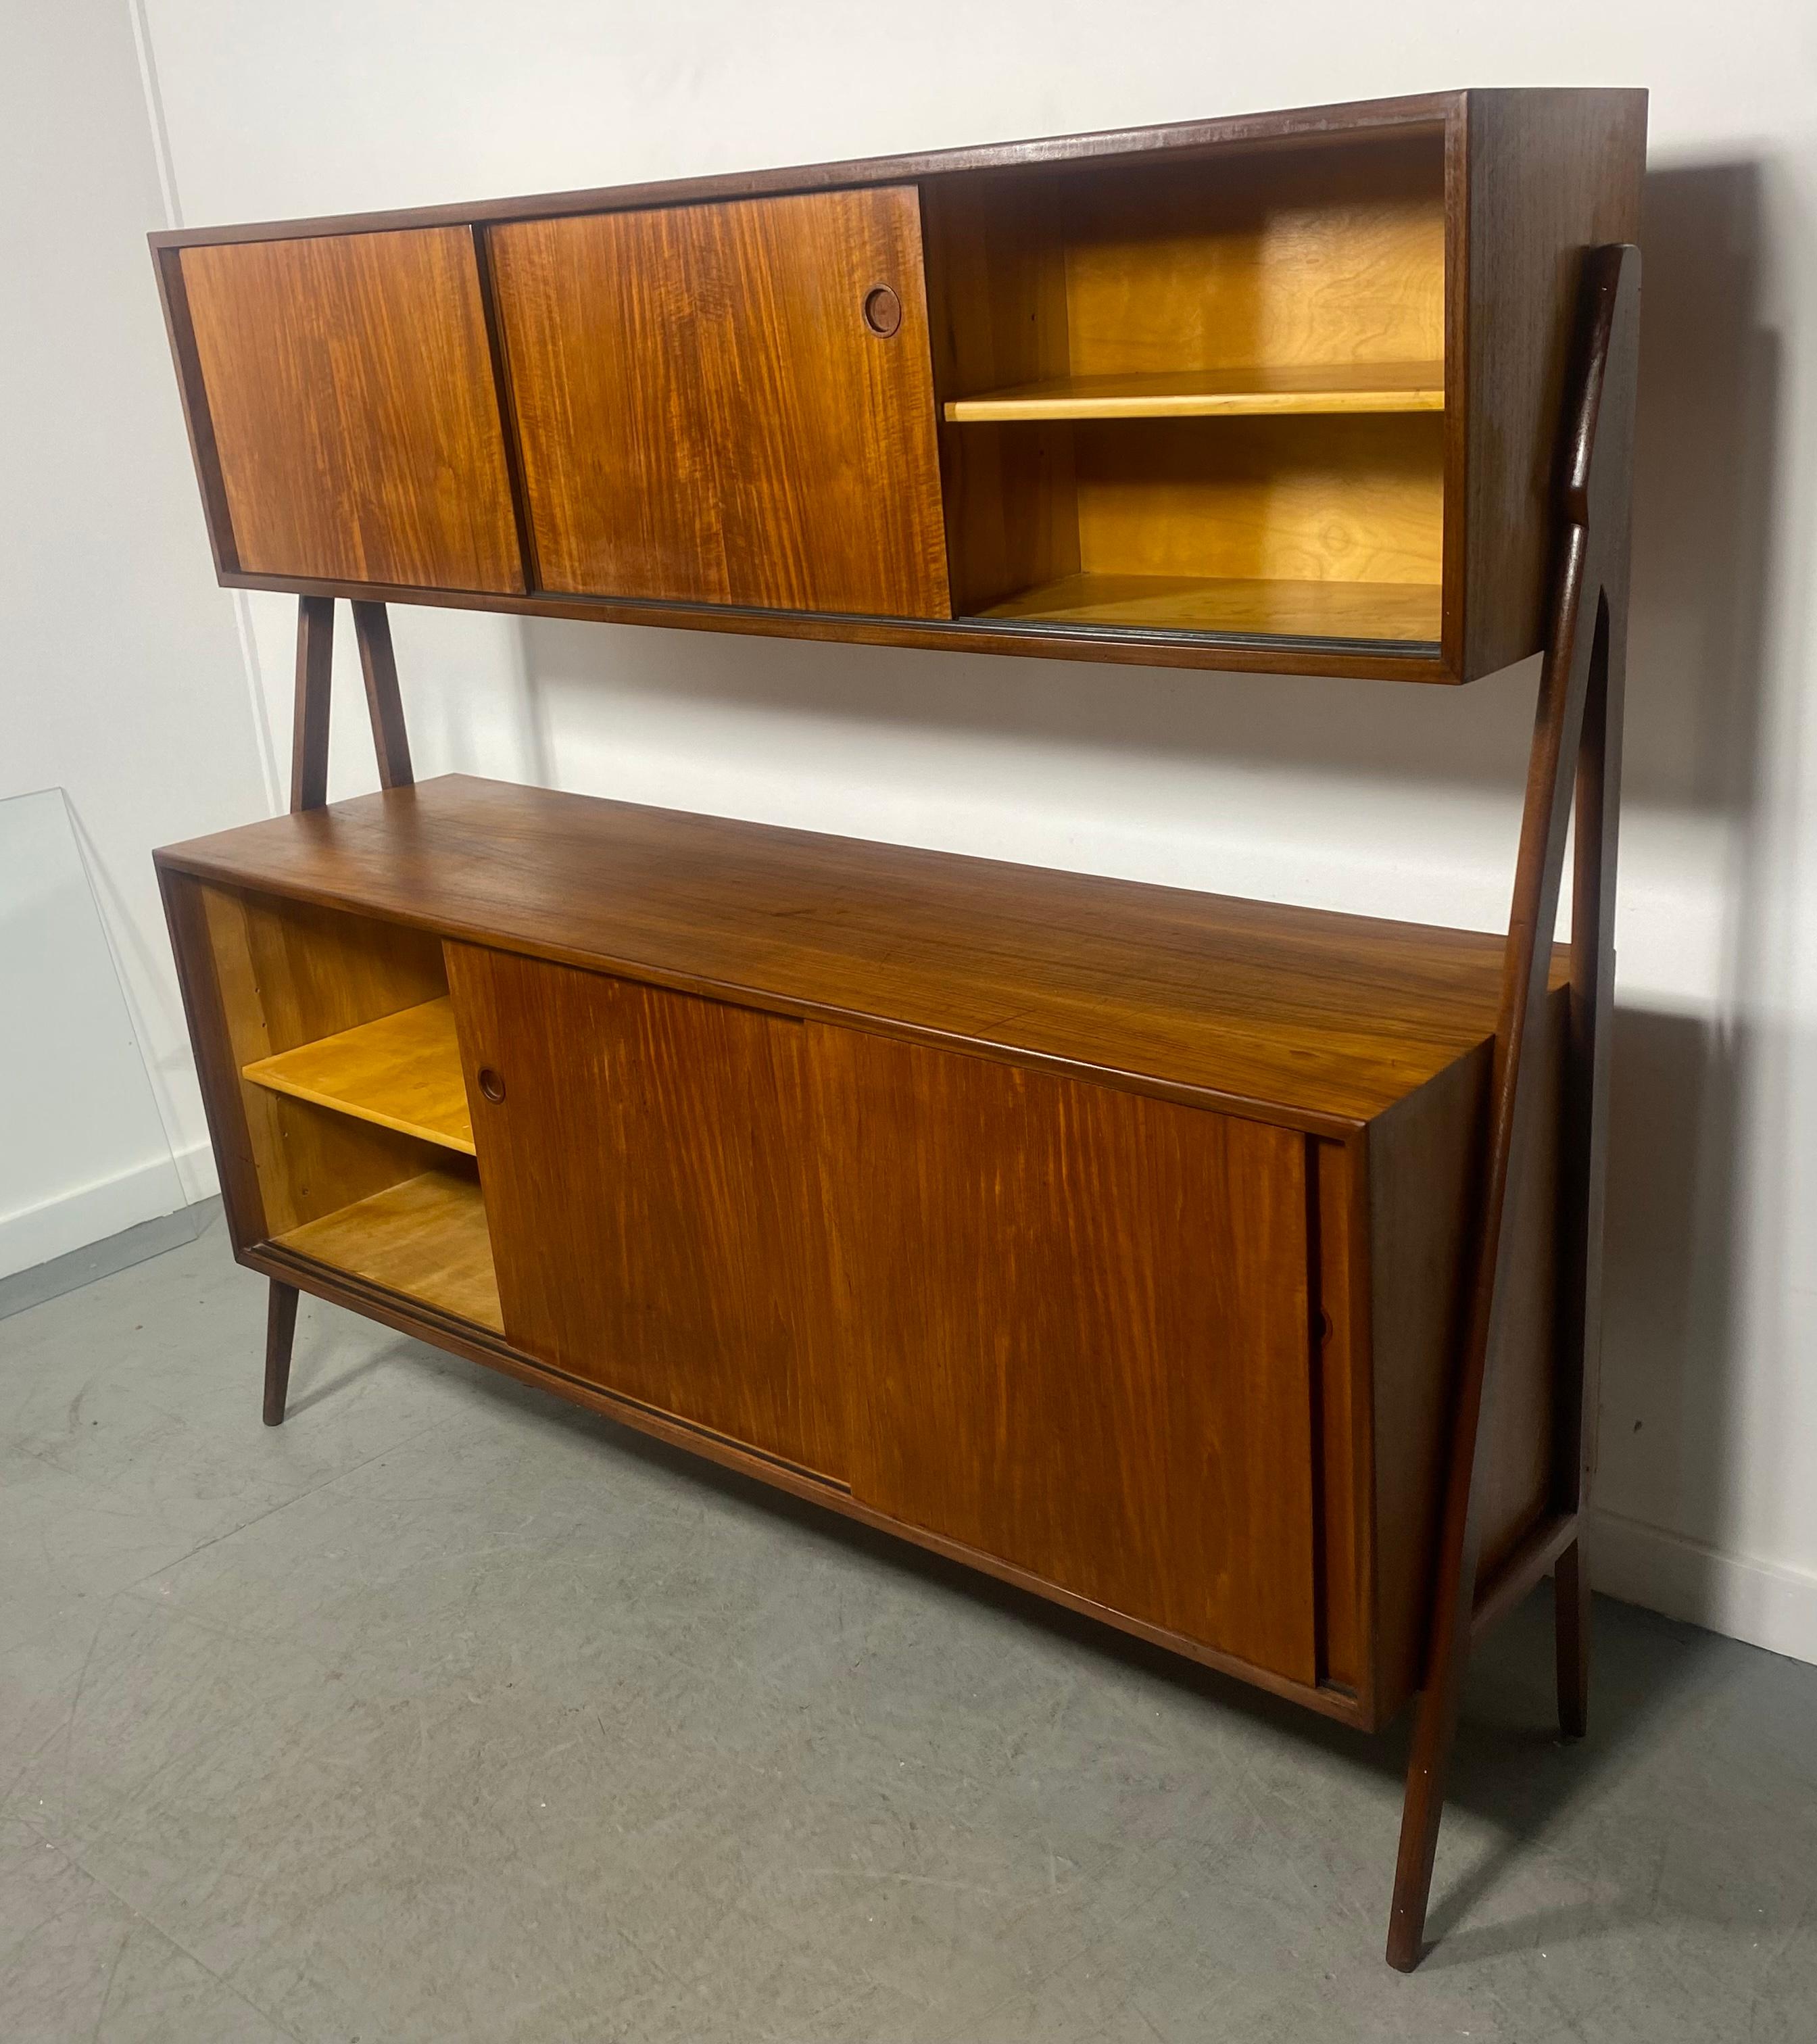 Mid-20th Century Classic Two Tier Danish Modern Sideboard Credenza in Teak and Oak by Randers